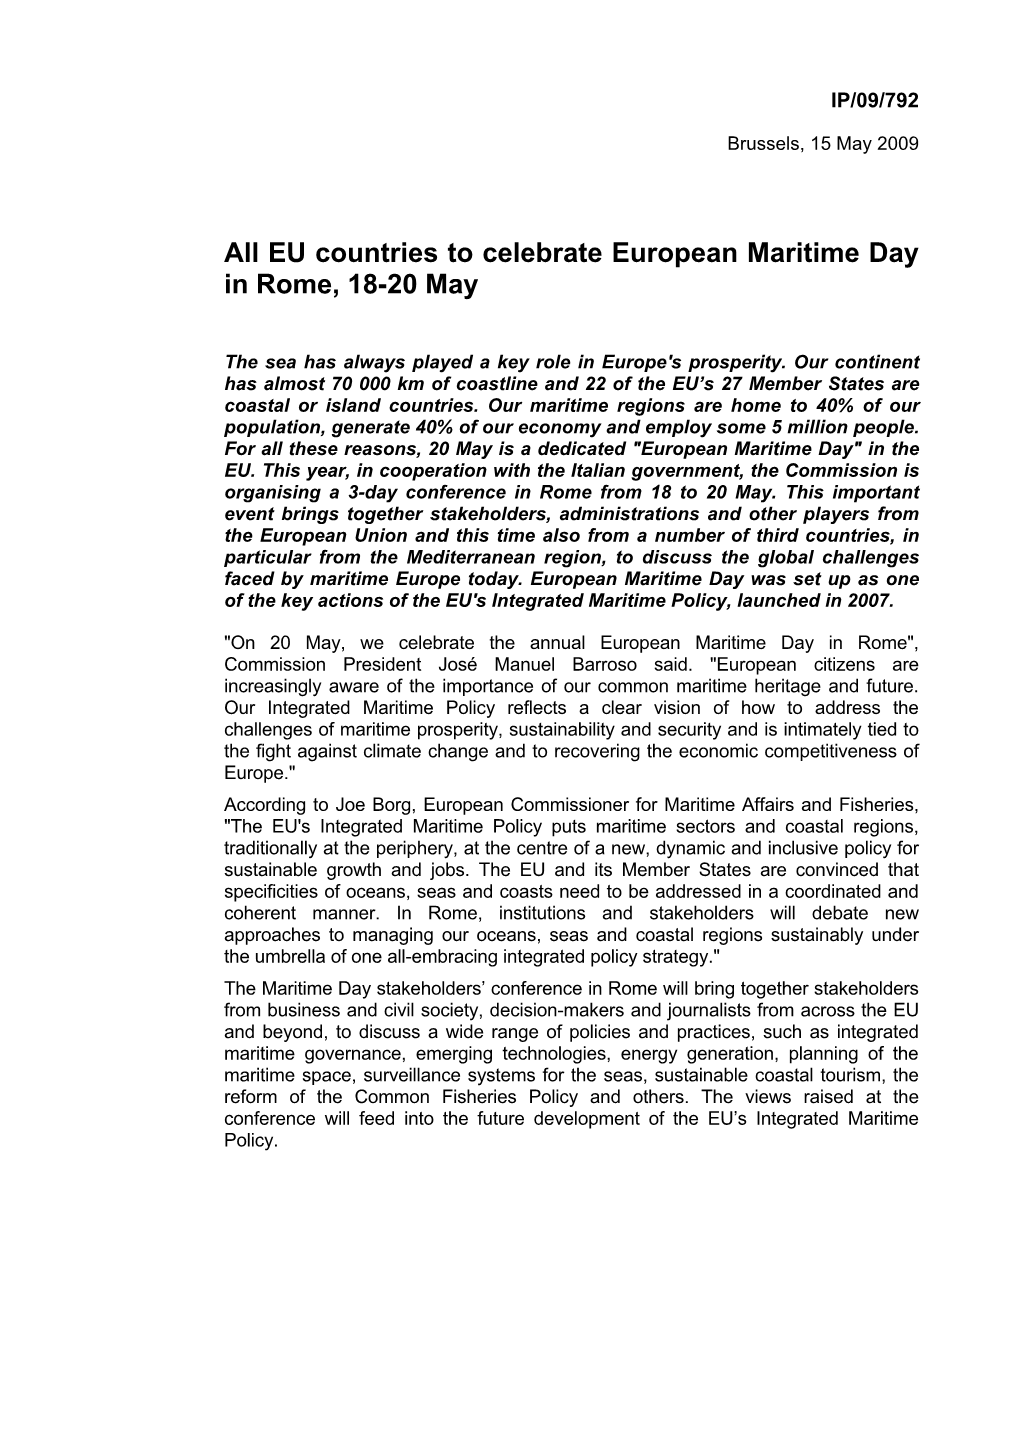 EU Countries to Celebrate European Maritime Day in Rome, 18-20 May